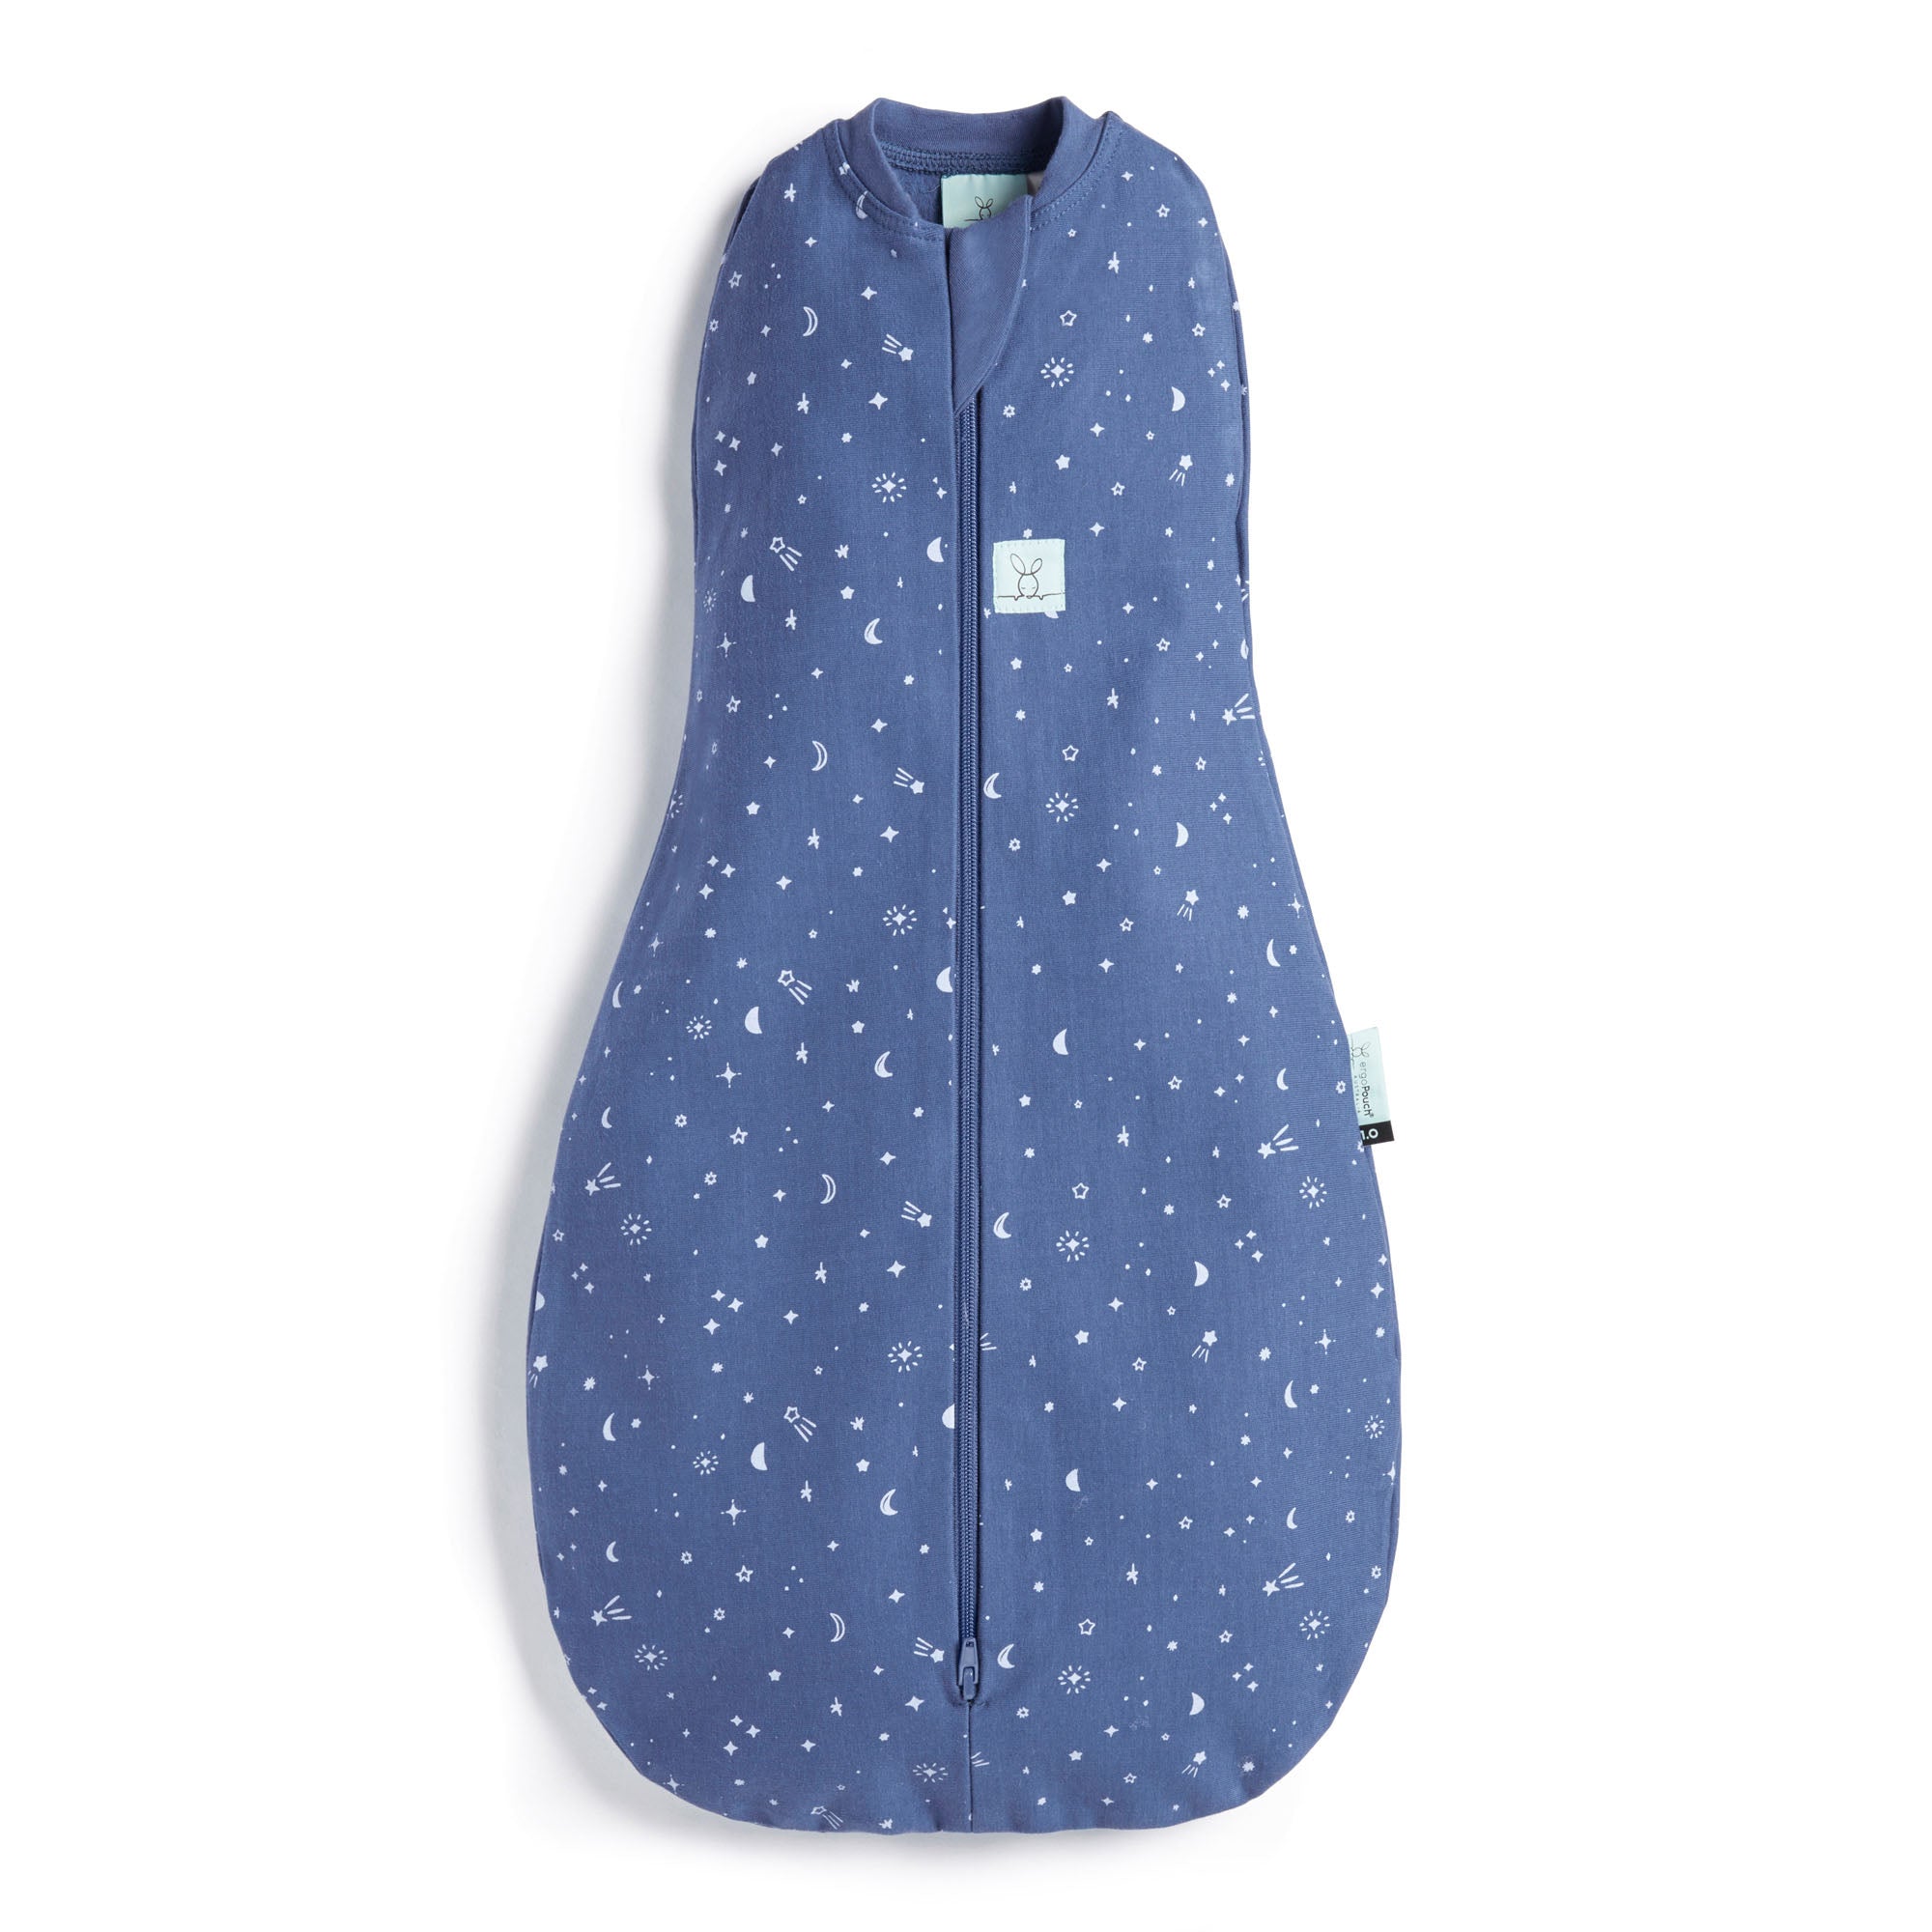 ergopouch-cocoon-swaddle-bag-0-2-tog-night-sky-ergo-zepco-0-2t00-03mns20- (1)